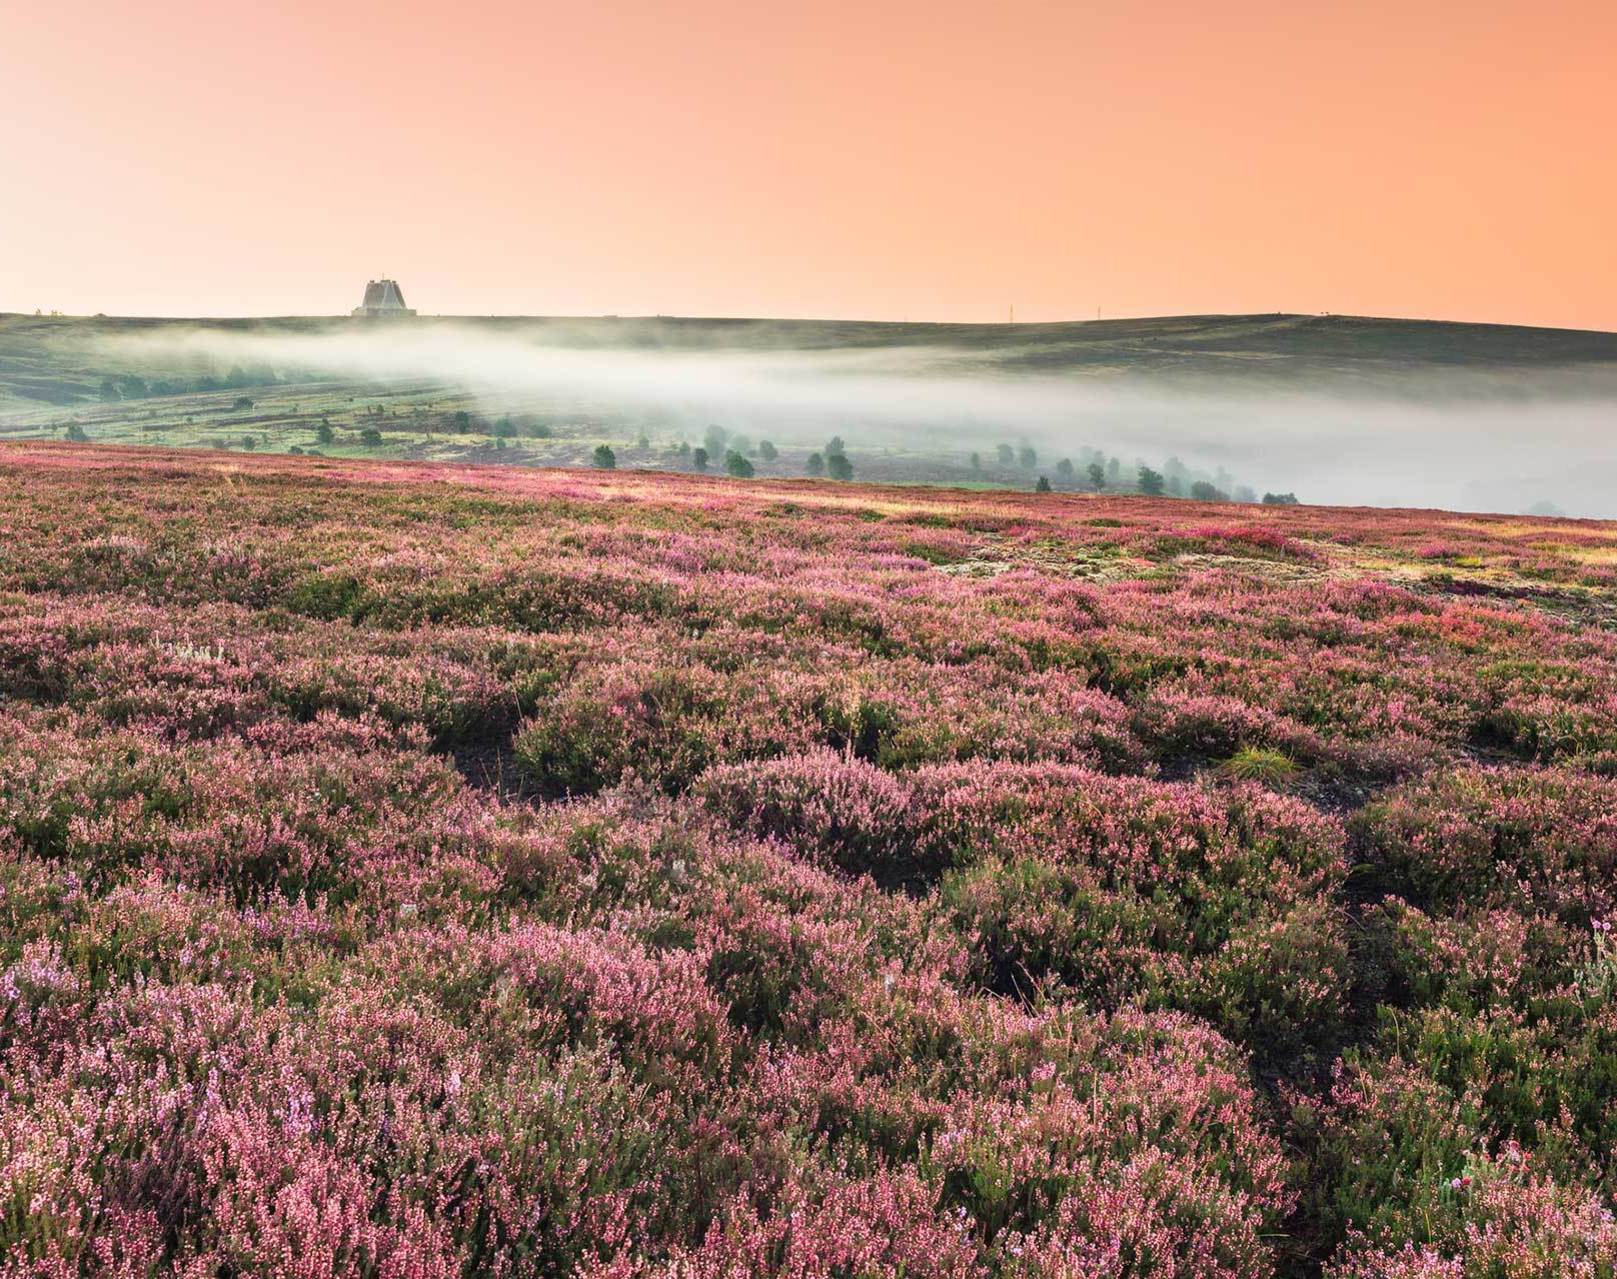 England - Yorkshire luxury holiday tours with stunning scenery